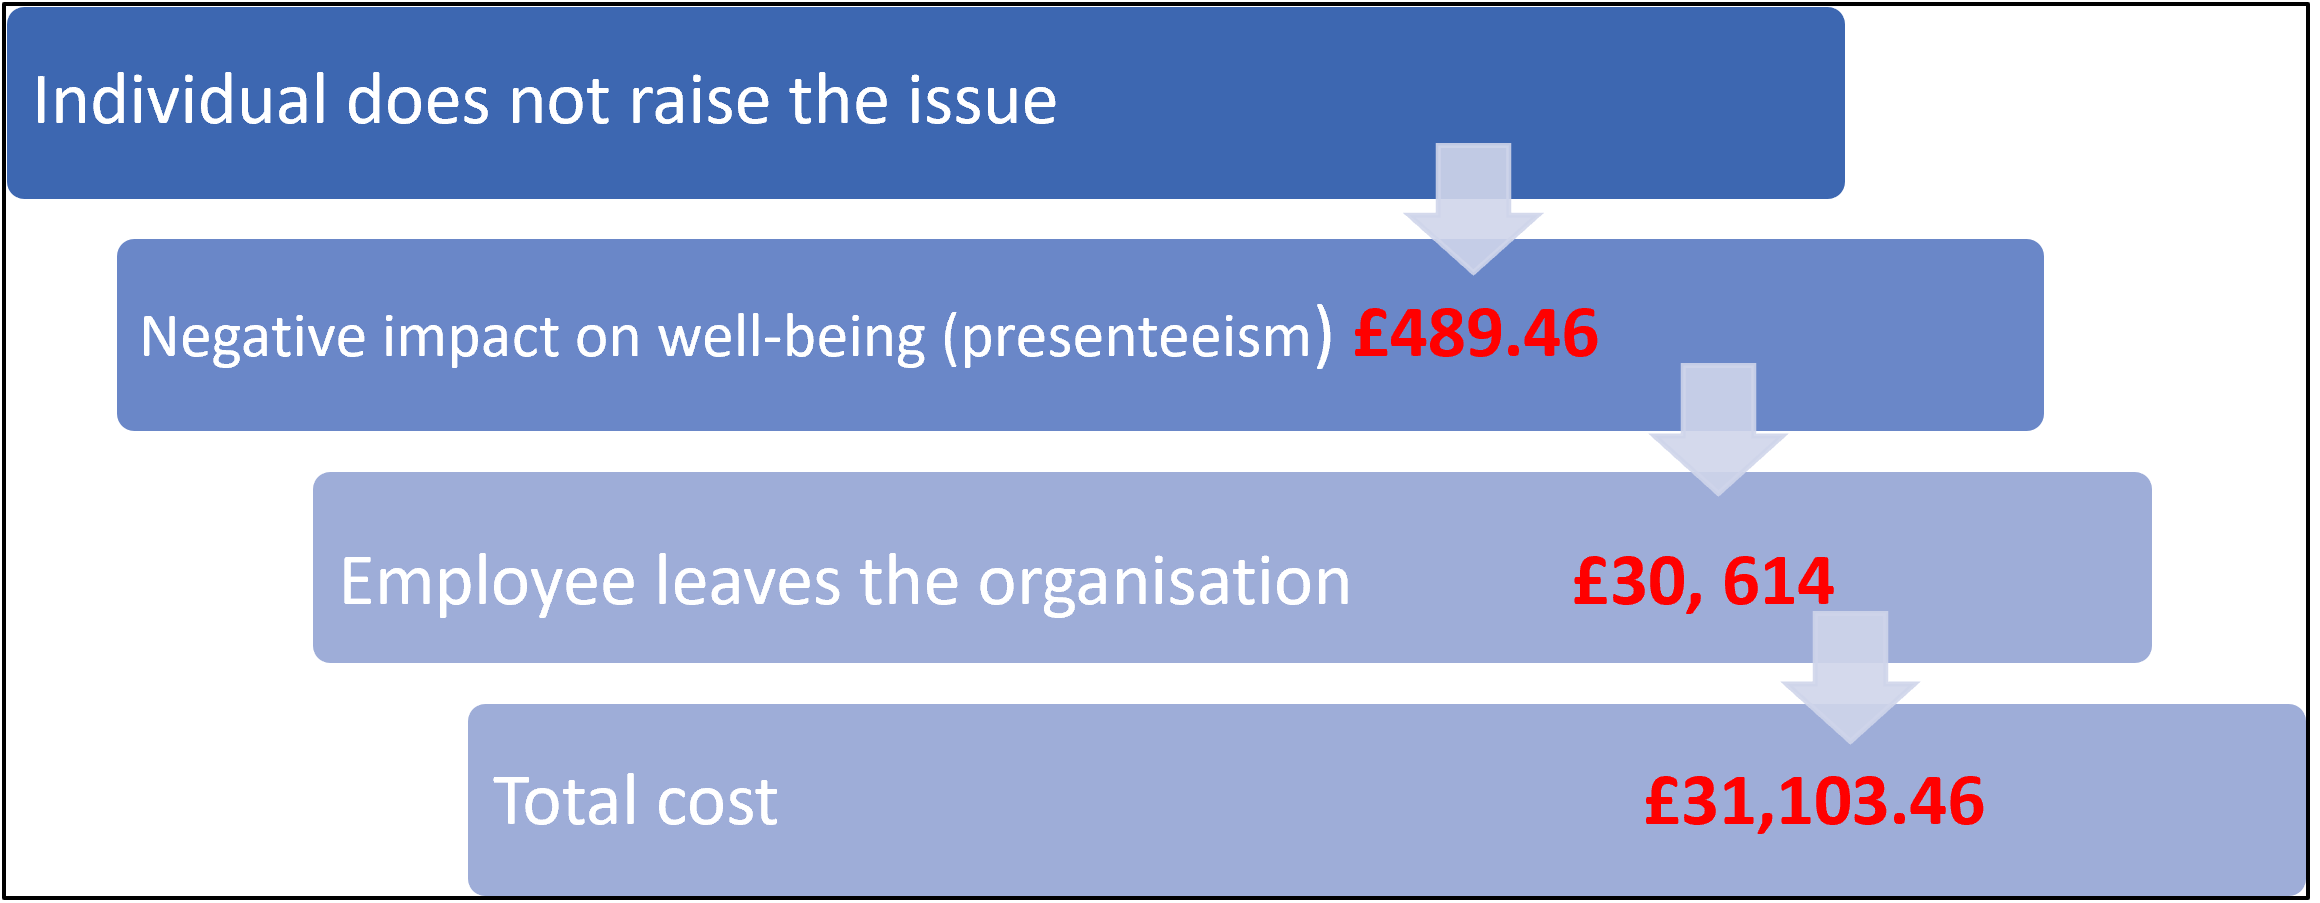 Individual does not raise the issue. Negative impact on wellbeing (presenteeism) £489.46. Employee leaves the organisation £30,614. Total cost £31,103.46.